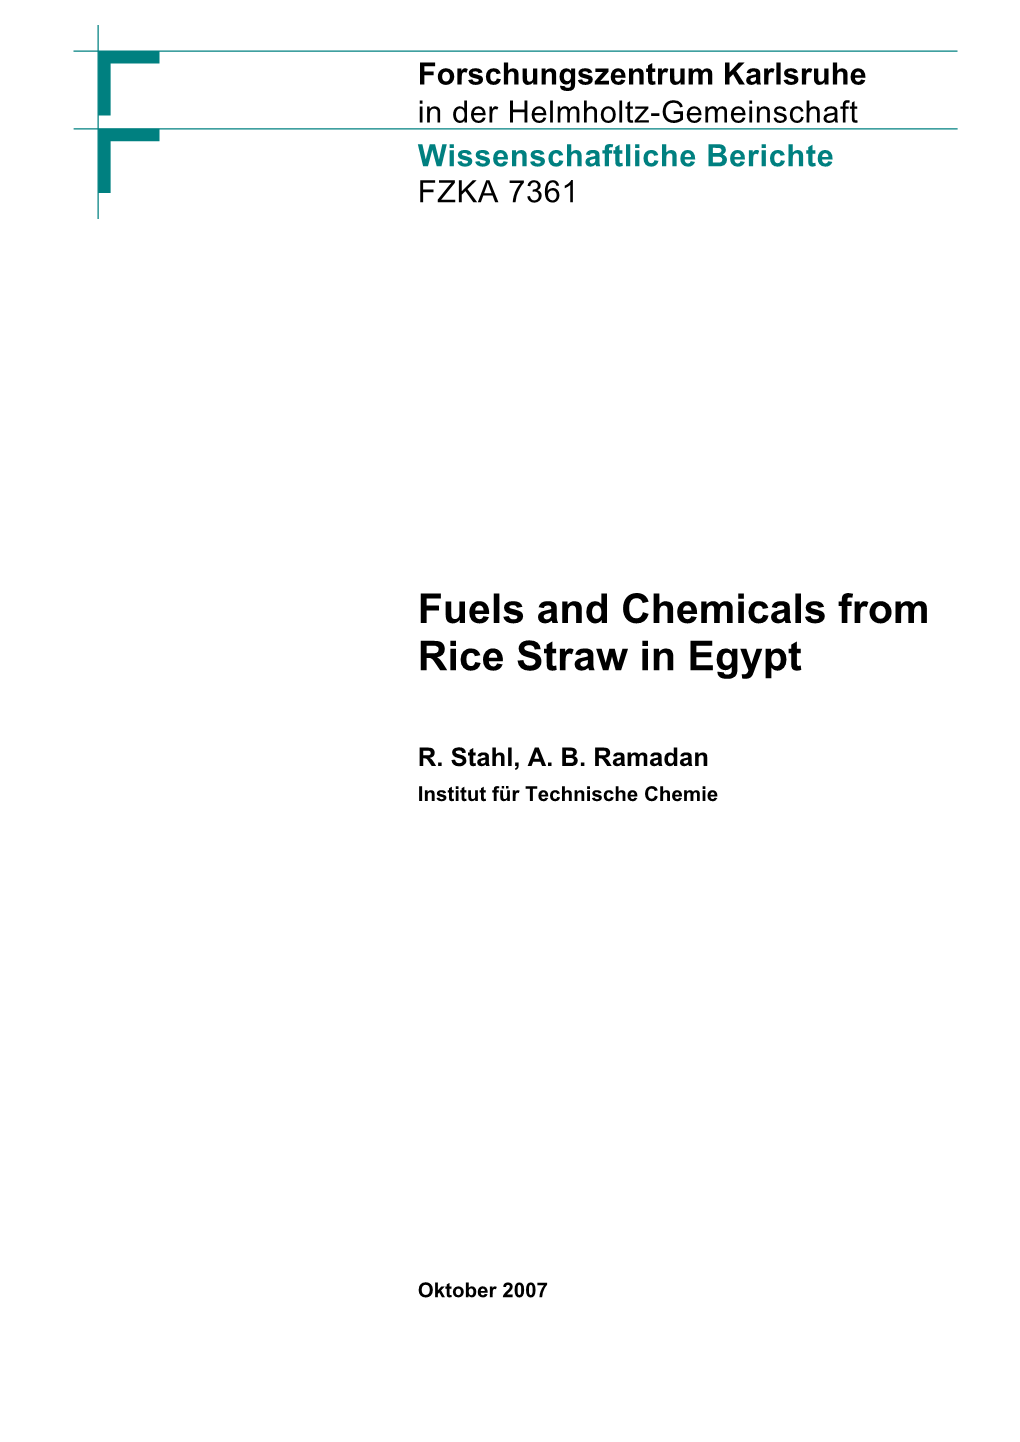 Geography and Population 5 5 Agricultural Situation in 2004 5 6 Rice 6 6.1 General 6 6.2 Rice Production in Egypt 6 6.3